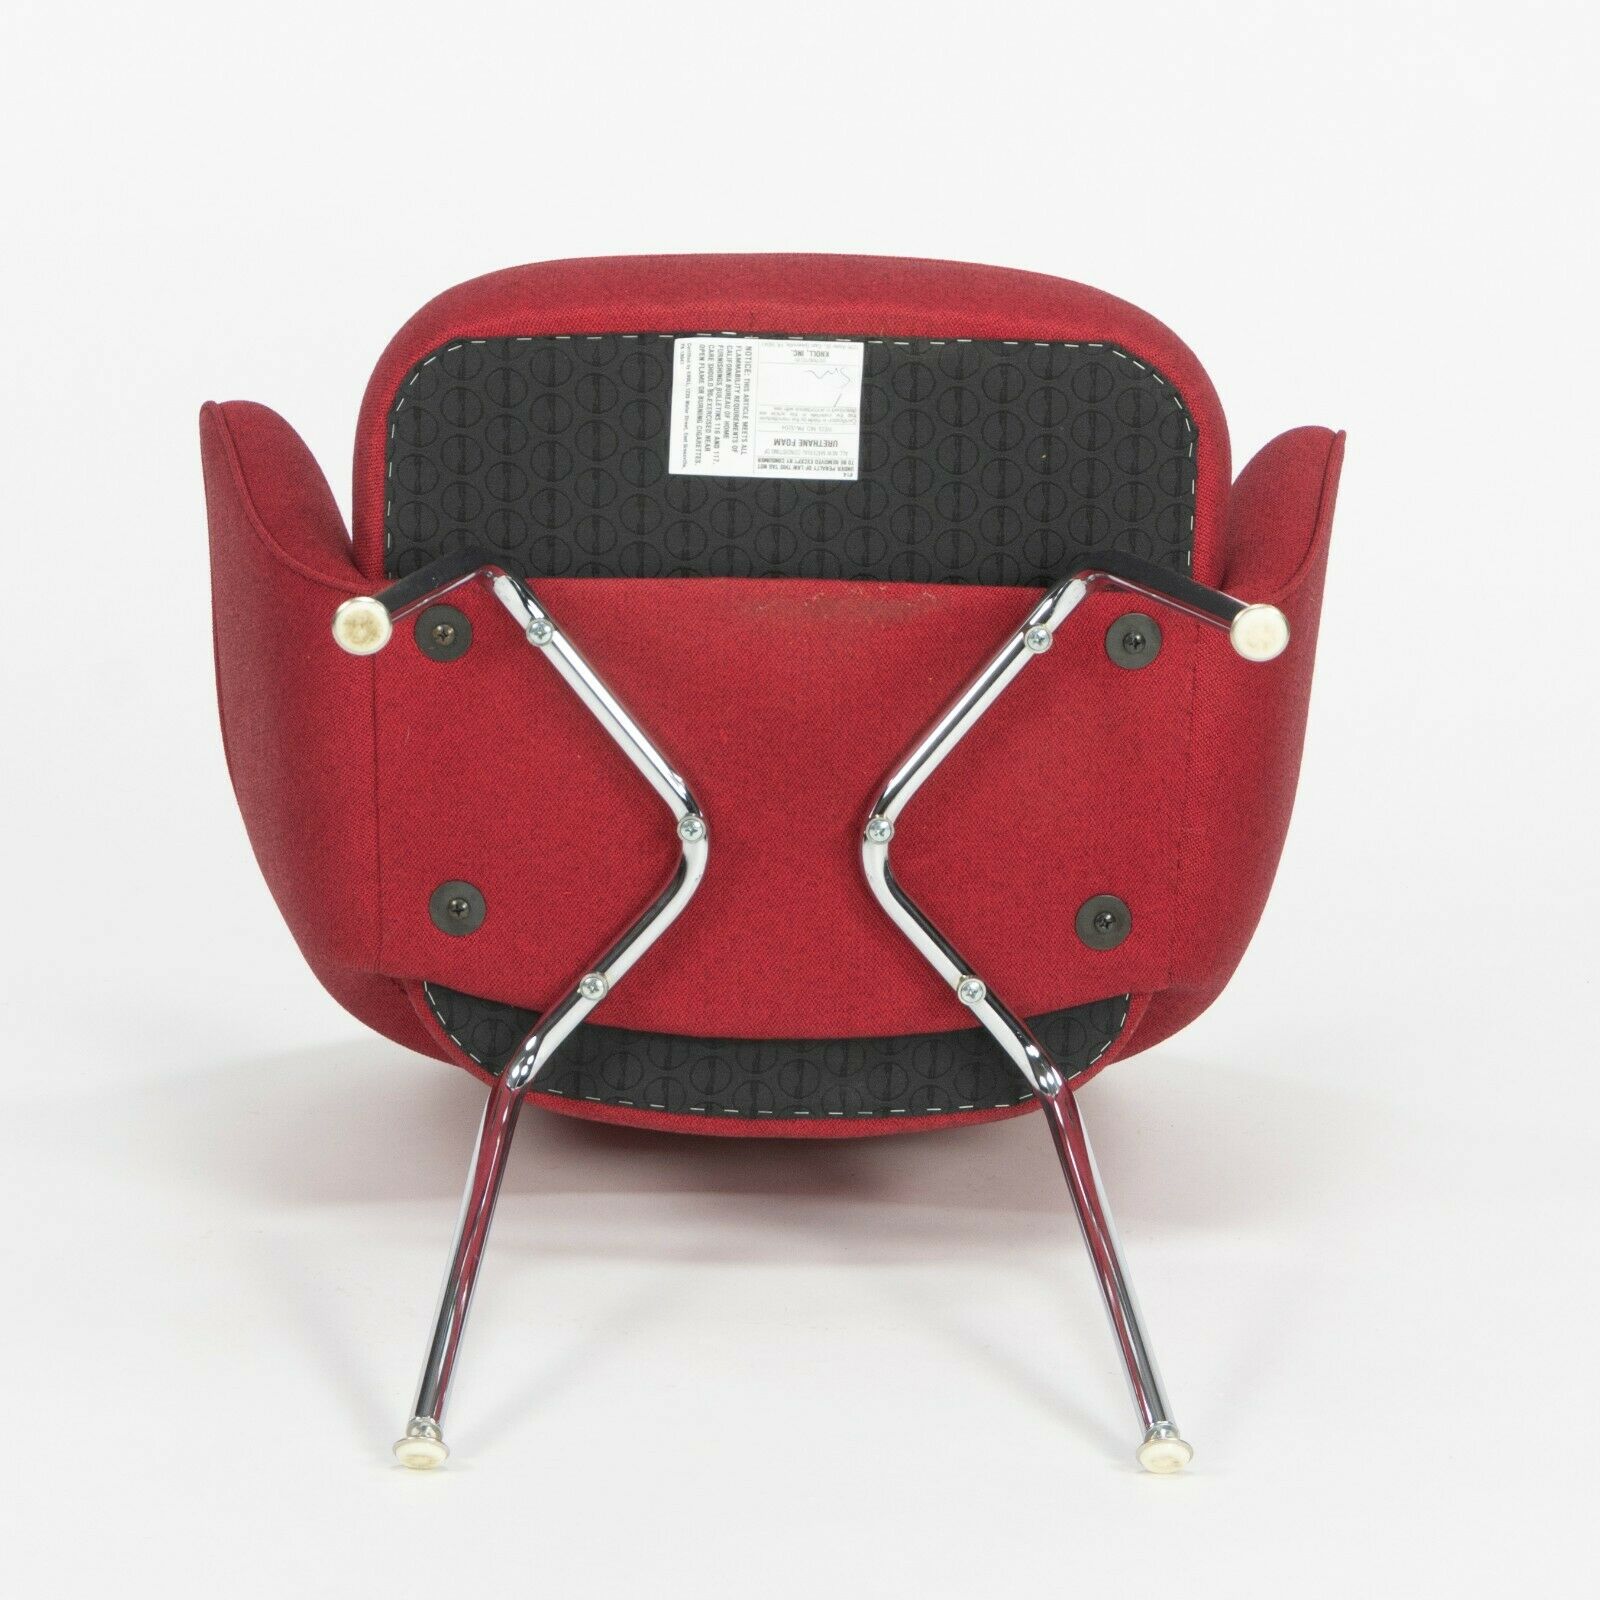 SOLD Red Fabric Eero Saarinen for Knoll 2020 Executive Arm Chair with Chrome Legs